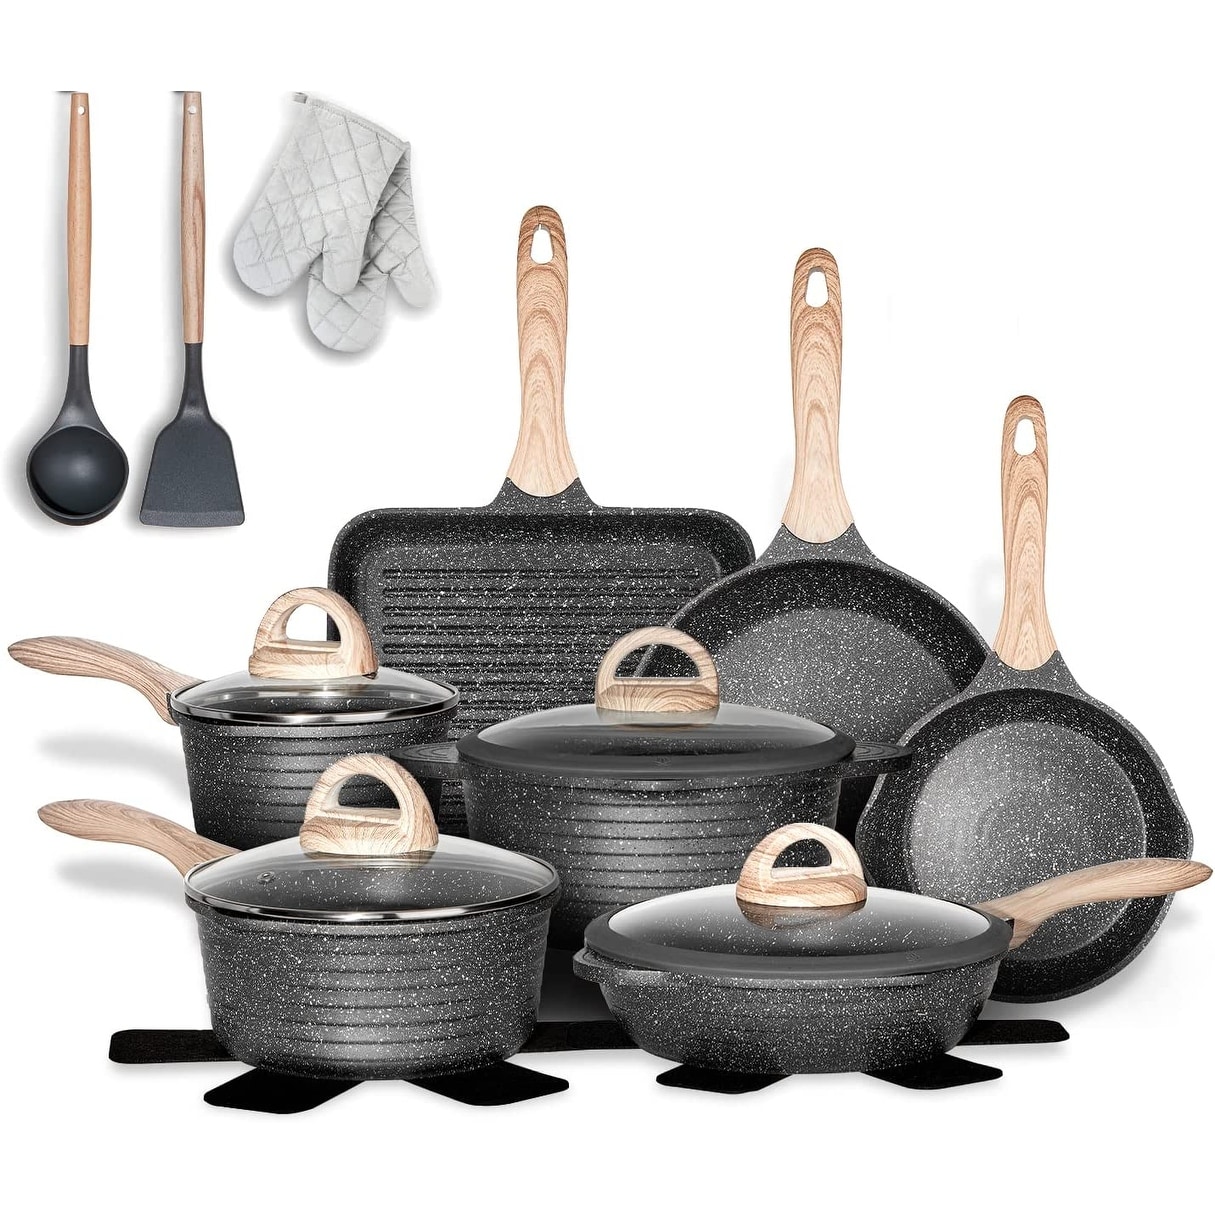 https://ak1.ostkcdn.com/images/products/is/images/direct/c8ba8cb0cda4087216e8400417bbf39143607fcf/Pots-and-Pans-Set-Nonstick-20PCS%2C-Granite-Coating-Cookware-Sets-Induction-Compatible-with-Frying-Pan.jpg